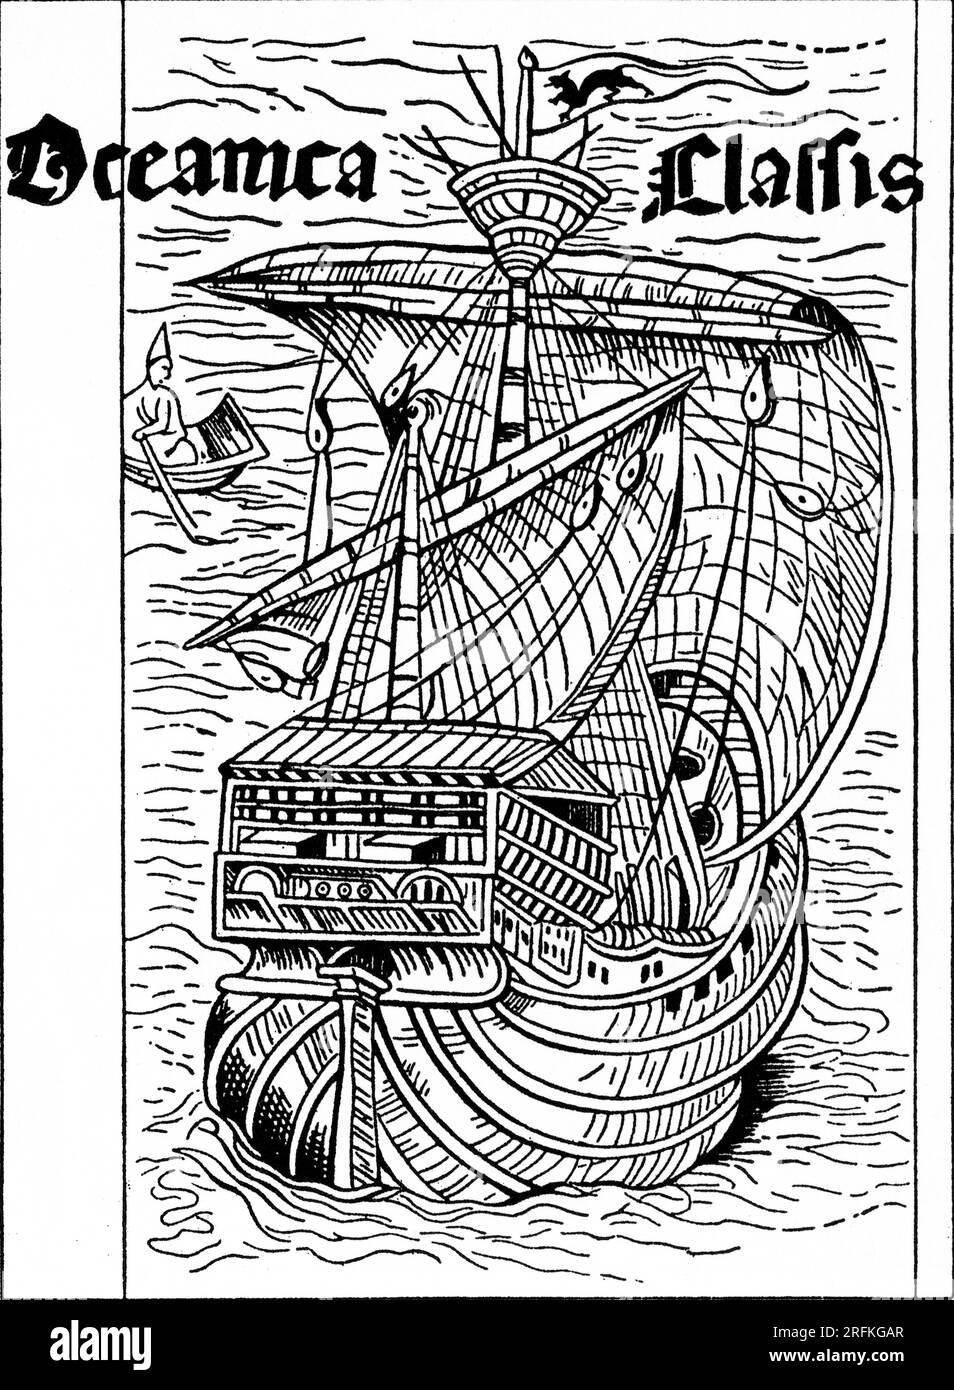 Illustrative woodcut from the Latin edition of Columbus's letter on his first voyage, 1494. A letter written by Christopher Columbus on February 15th, 1493, is the first known document announcing the results of his first voyage that set out in 1492 and reached the Americas. Stock Photo